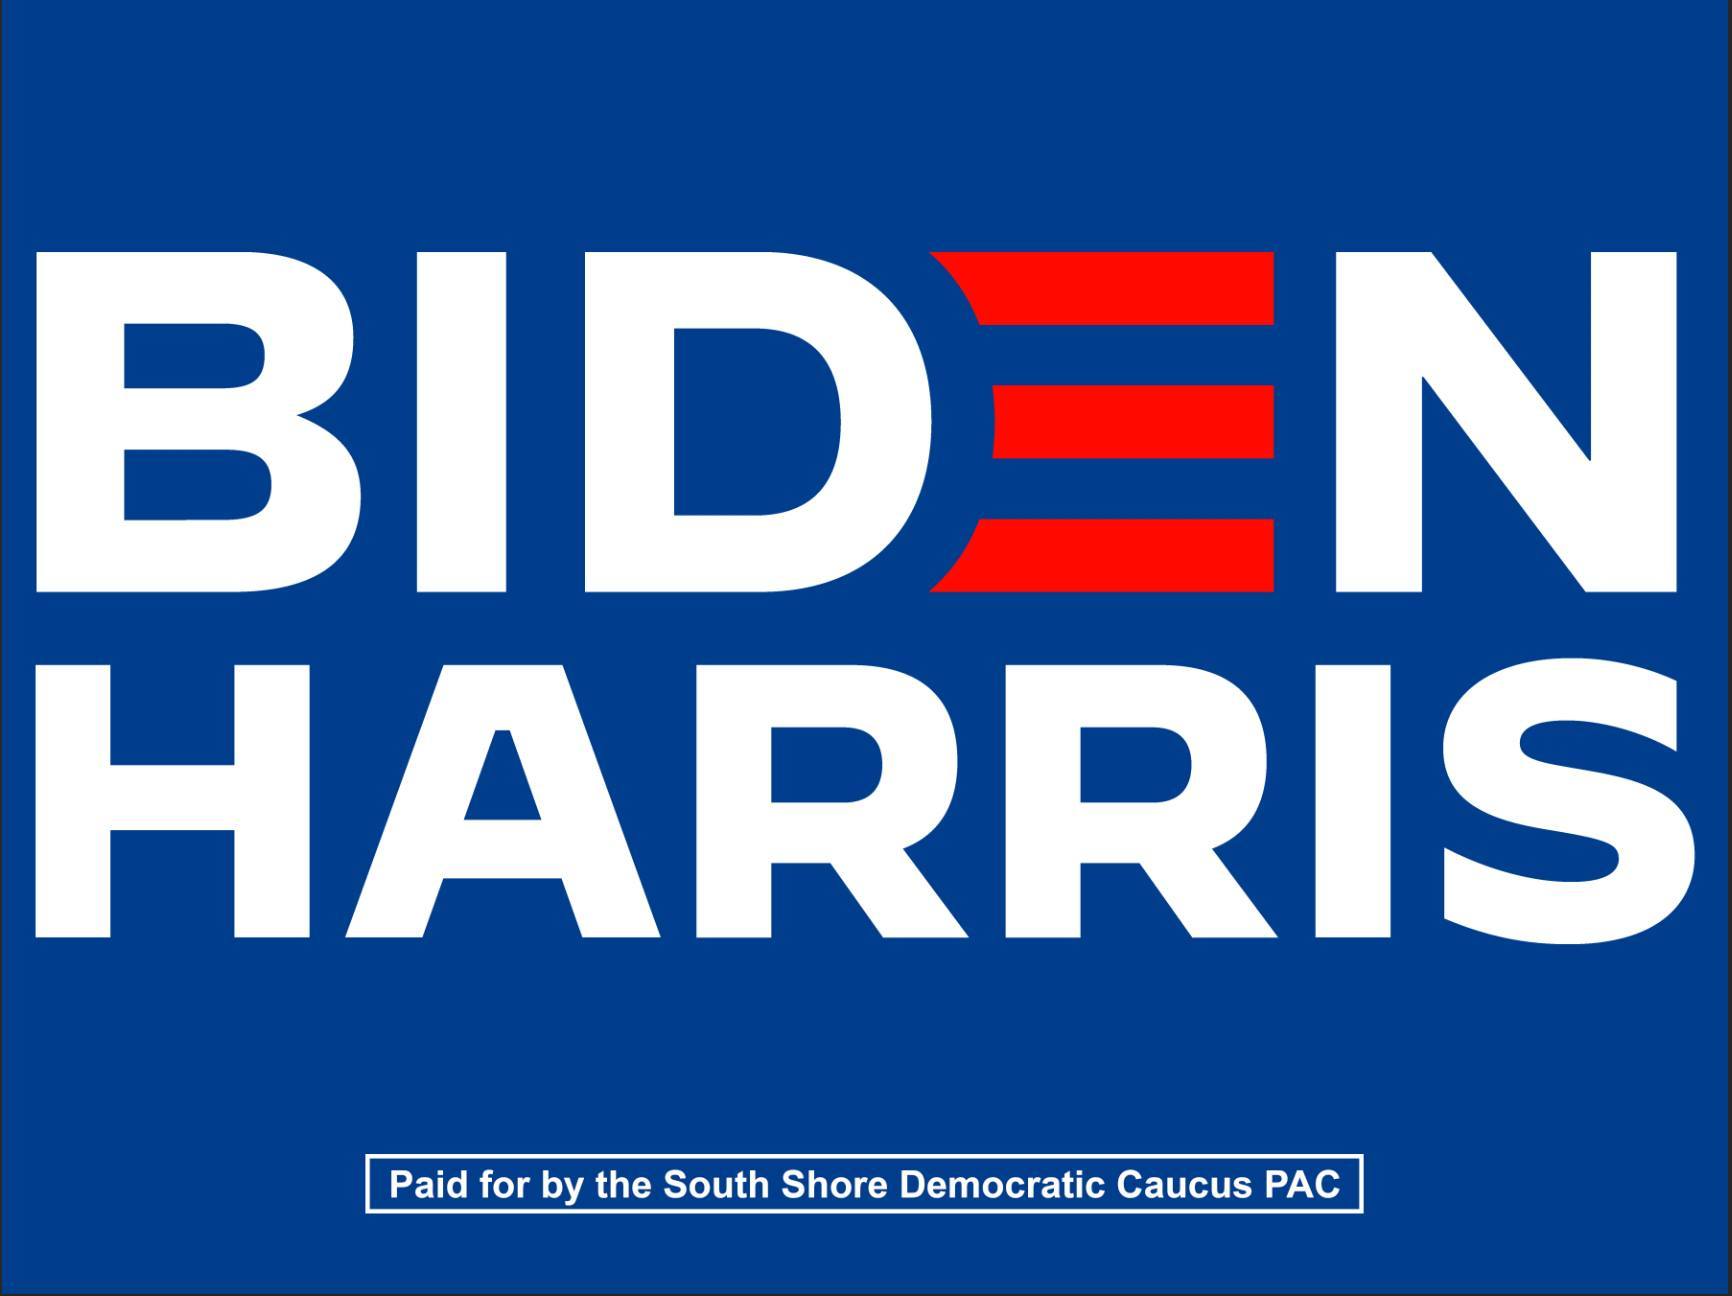 Image may contain: text that says 'BIDEN EN HARRIS Paid for by the South Shore Democratic Caucus PAC'